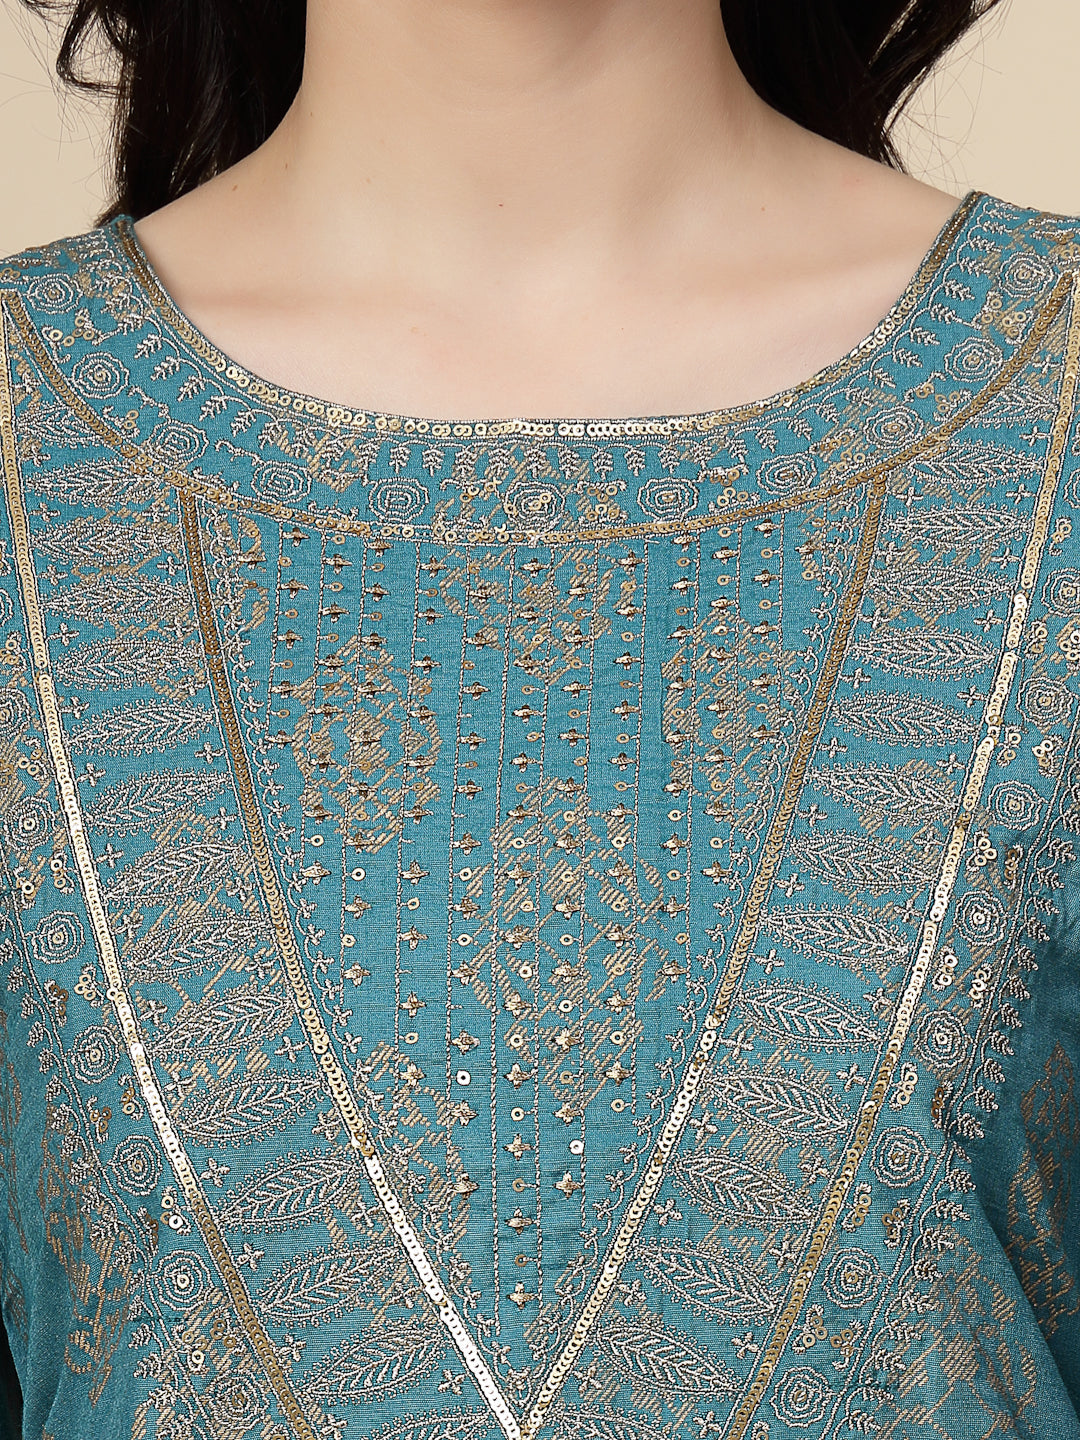 Women Teal  Blue  Color Embroidery Staright kurta